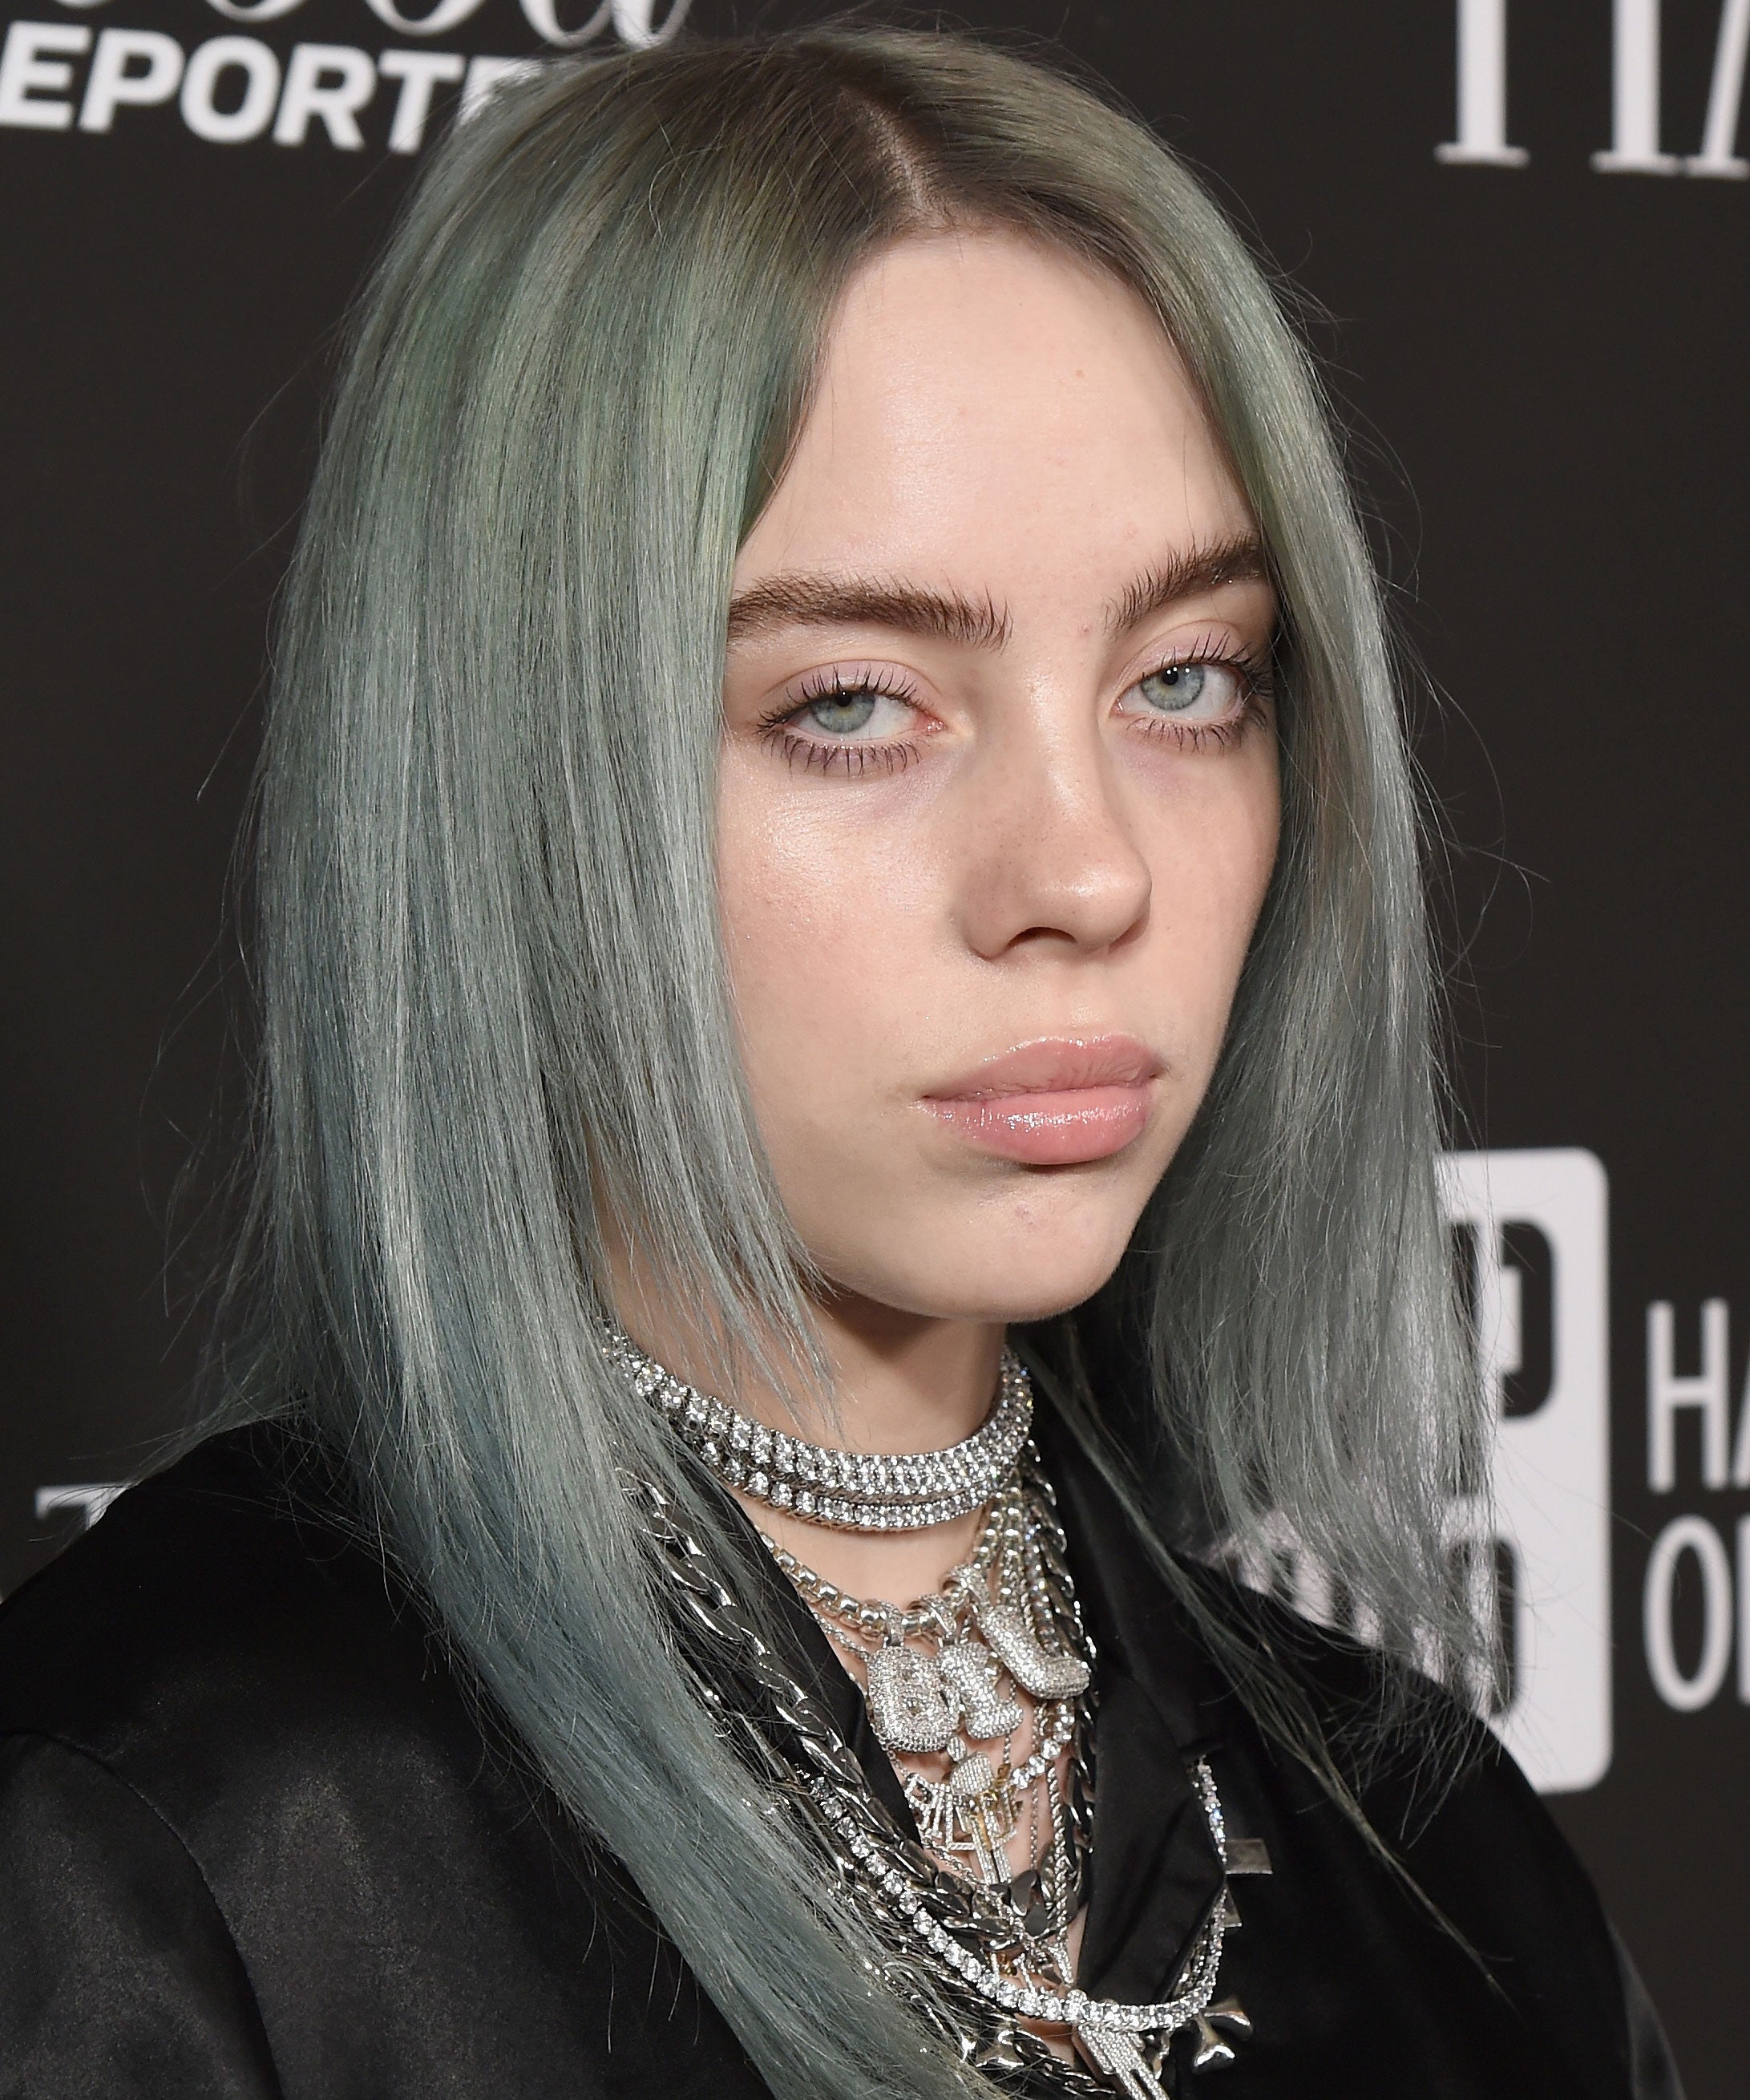 Billie Eilish's hair color evolution: From green to blond